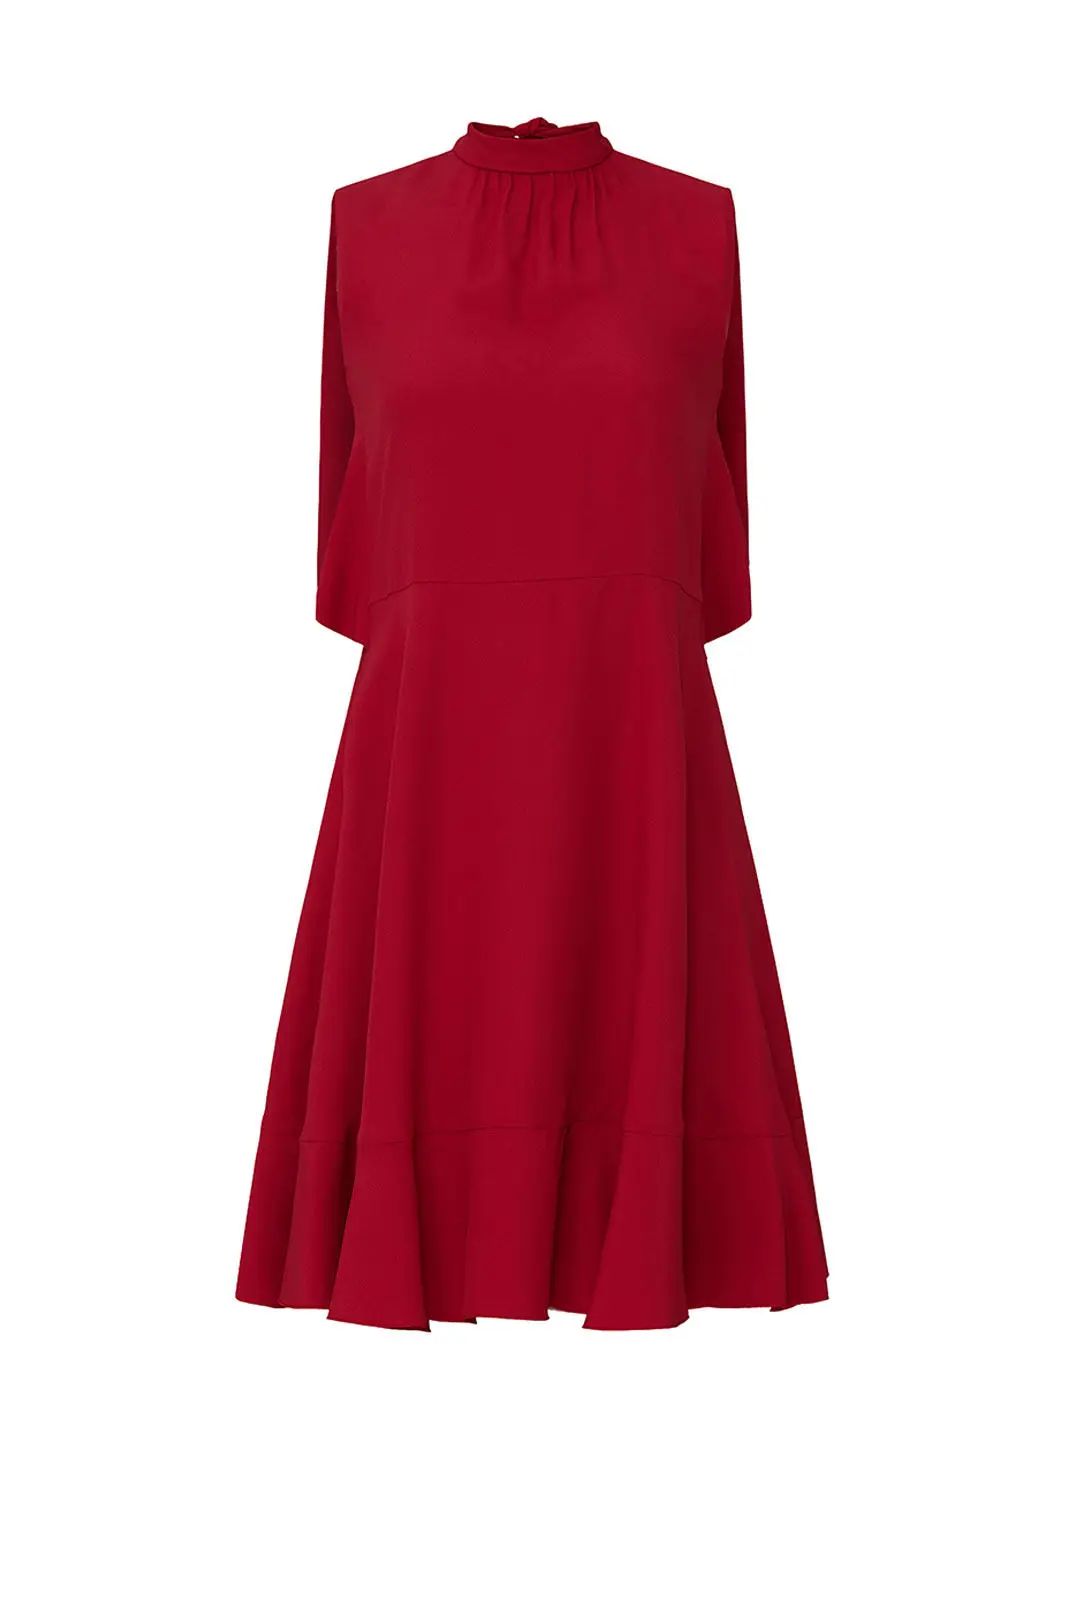 RED Valentino Red Abito Cape Dress | Rent the Runway